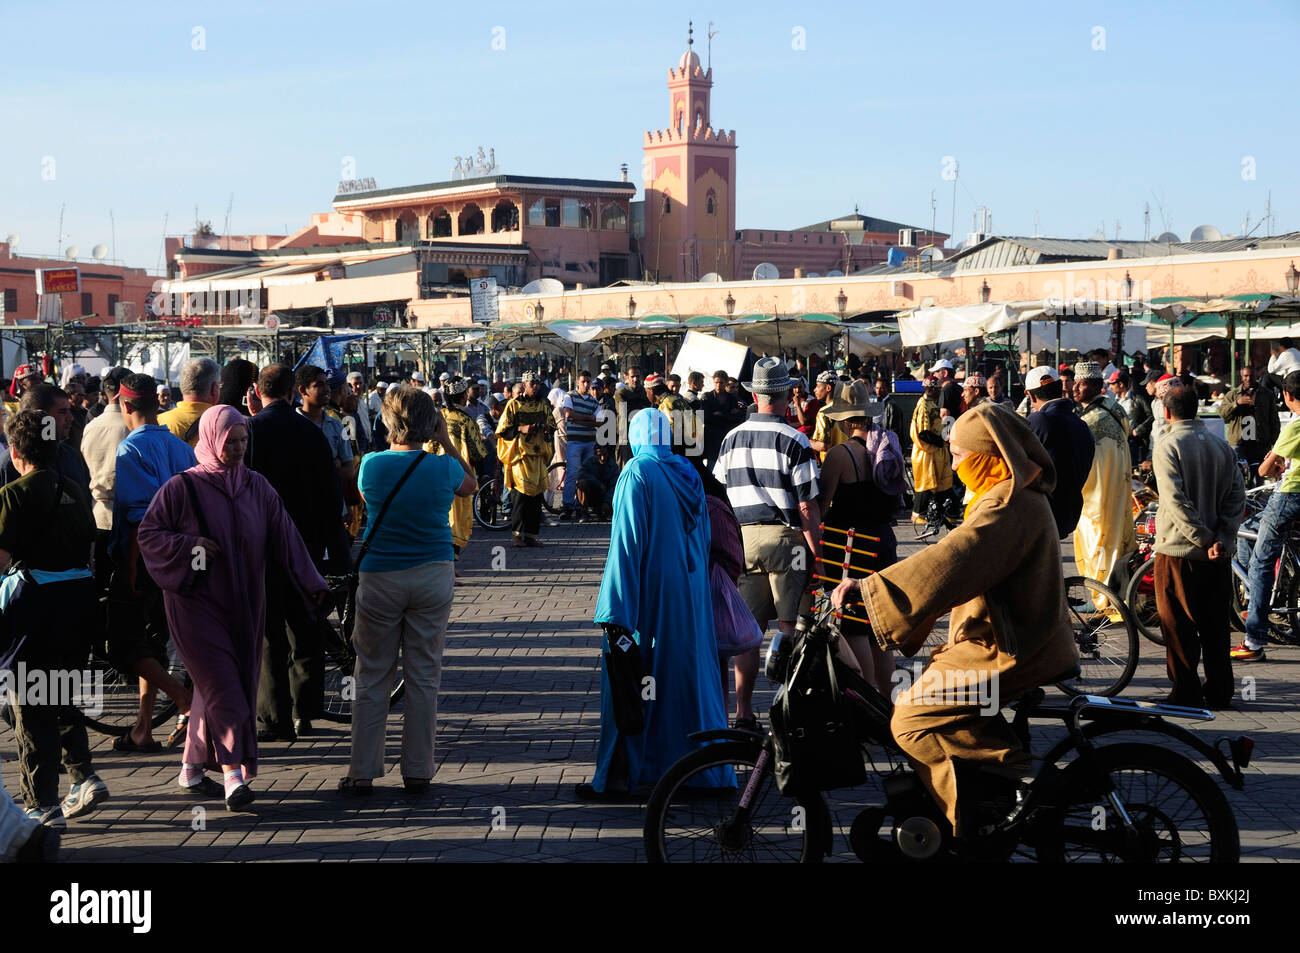 Crowds and street life at busy Djemaa el-Fna meeting place in Marrakech Minaret of Mosque Stock Photo